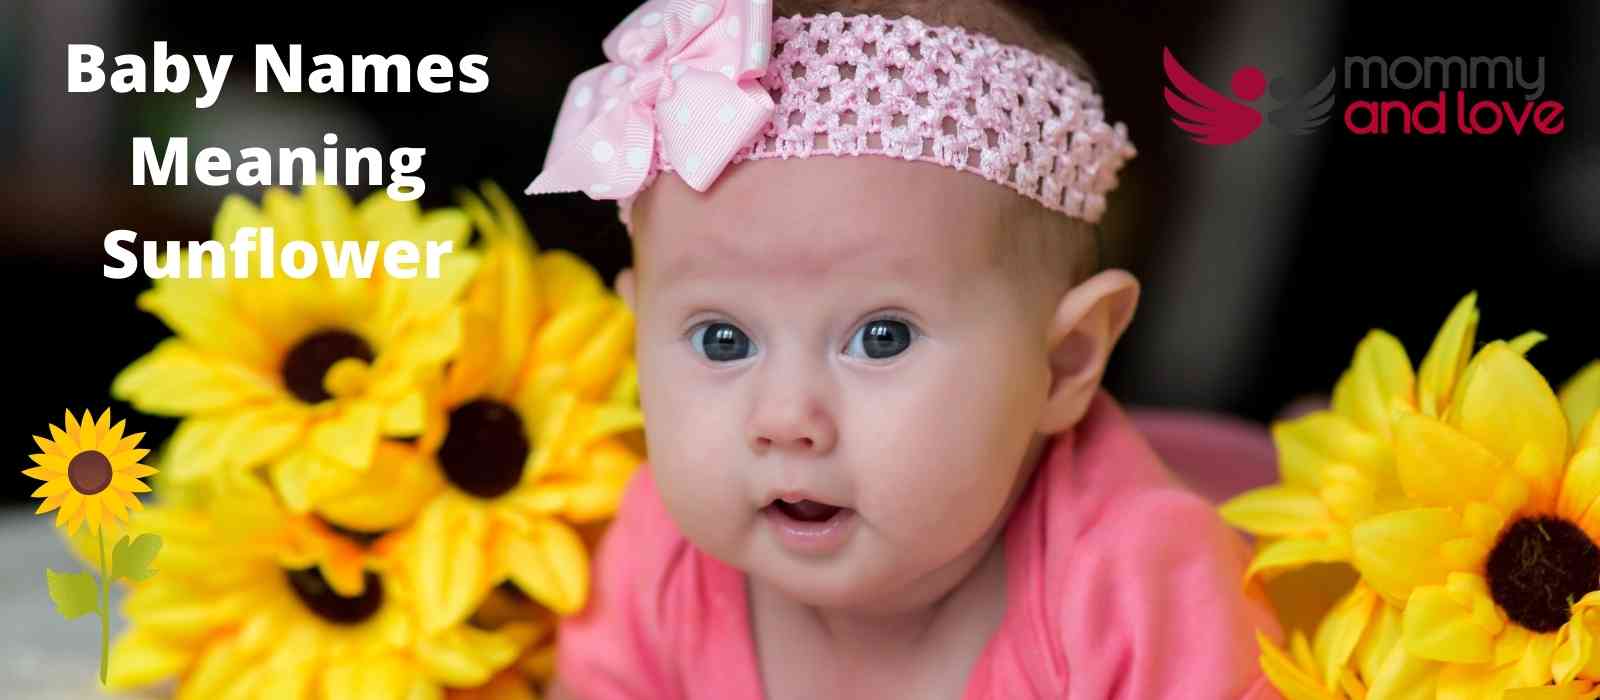 Baby Names Meaning Sunflower